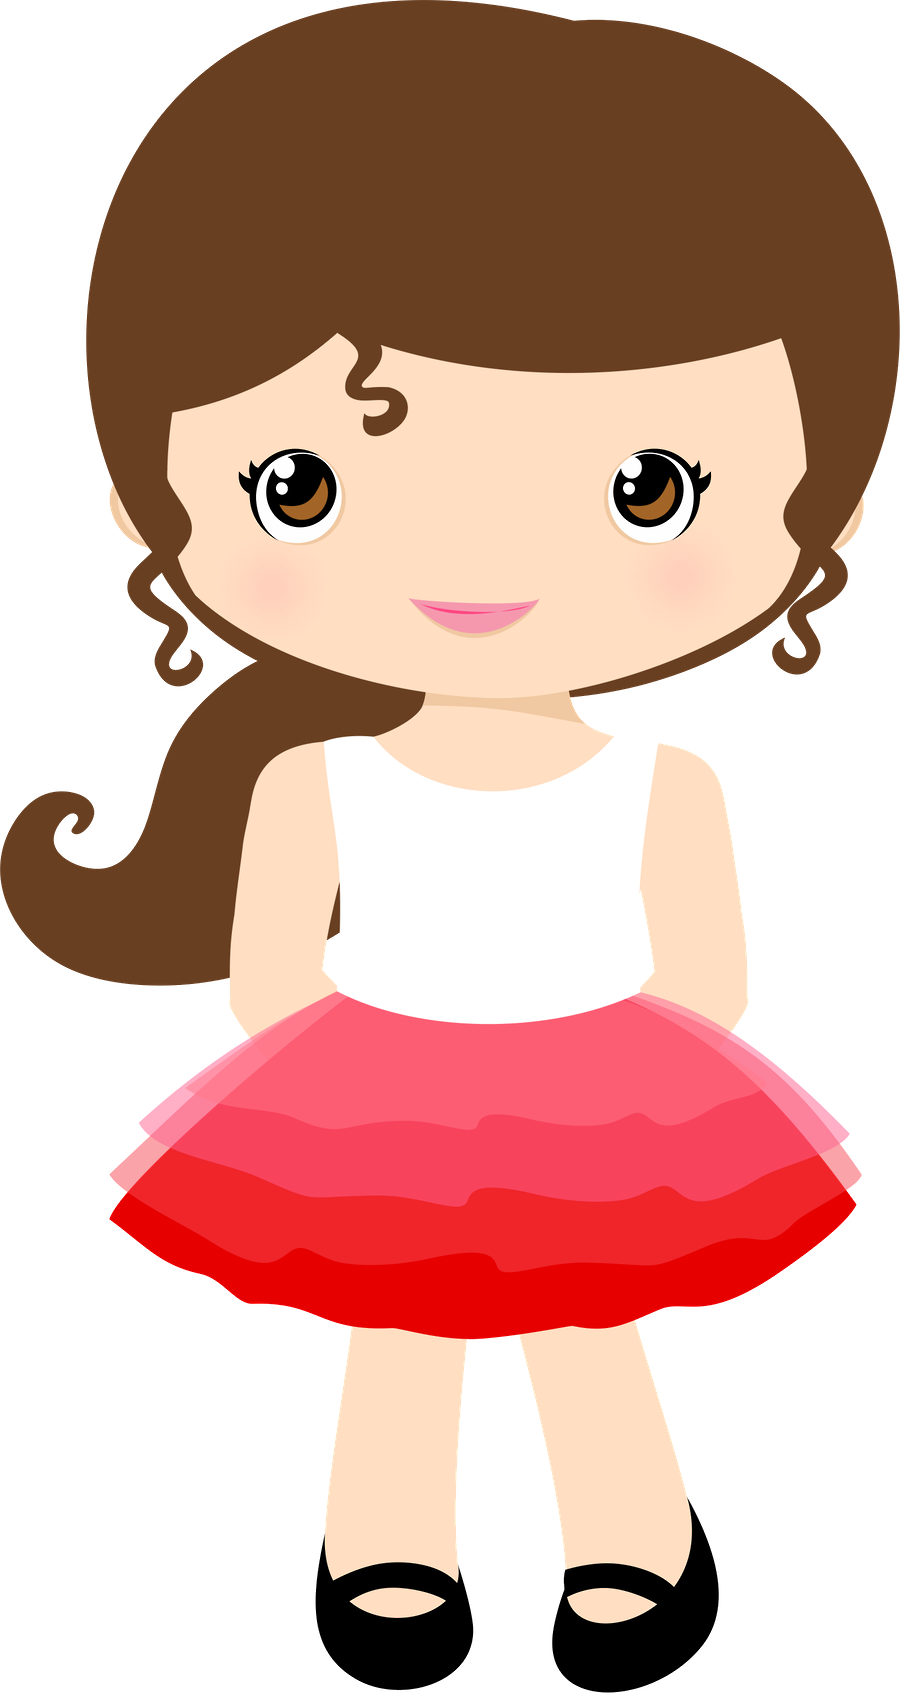 hello clipart simple lady